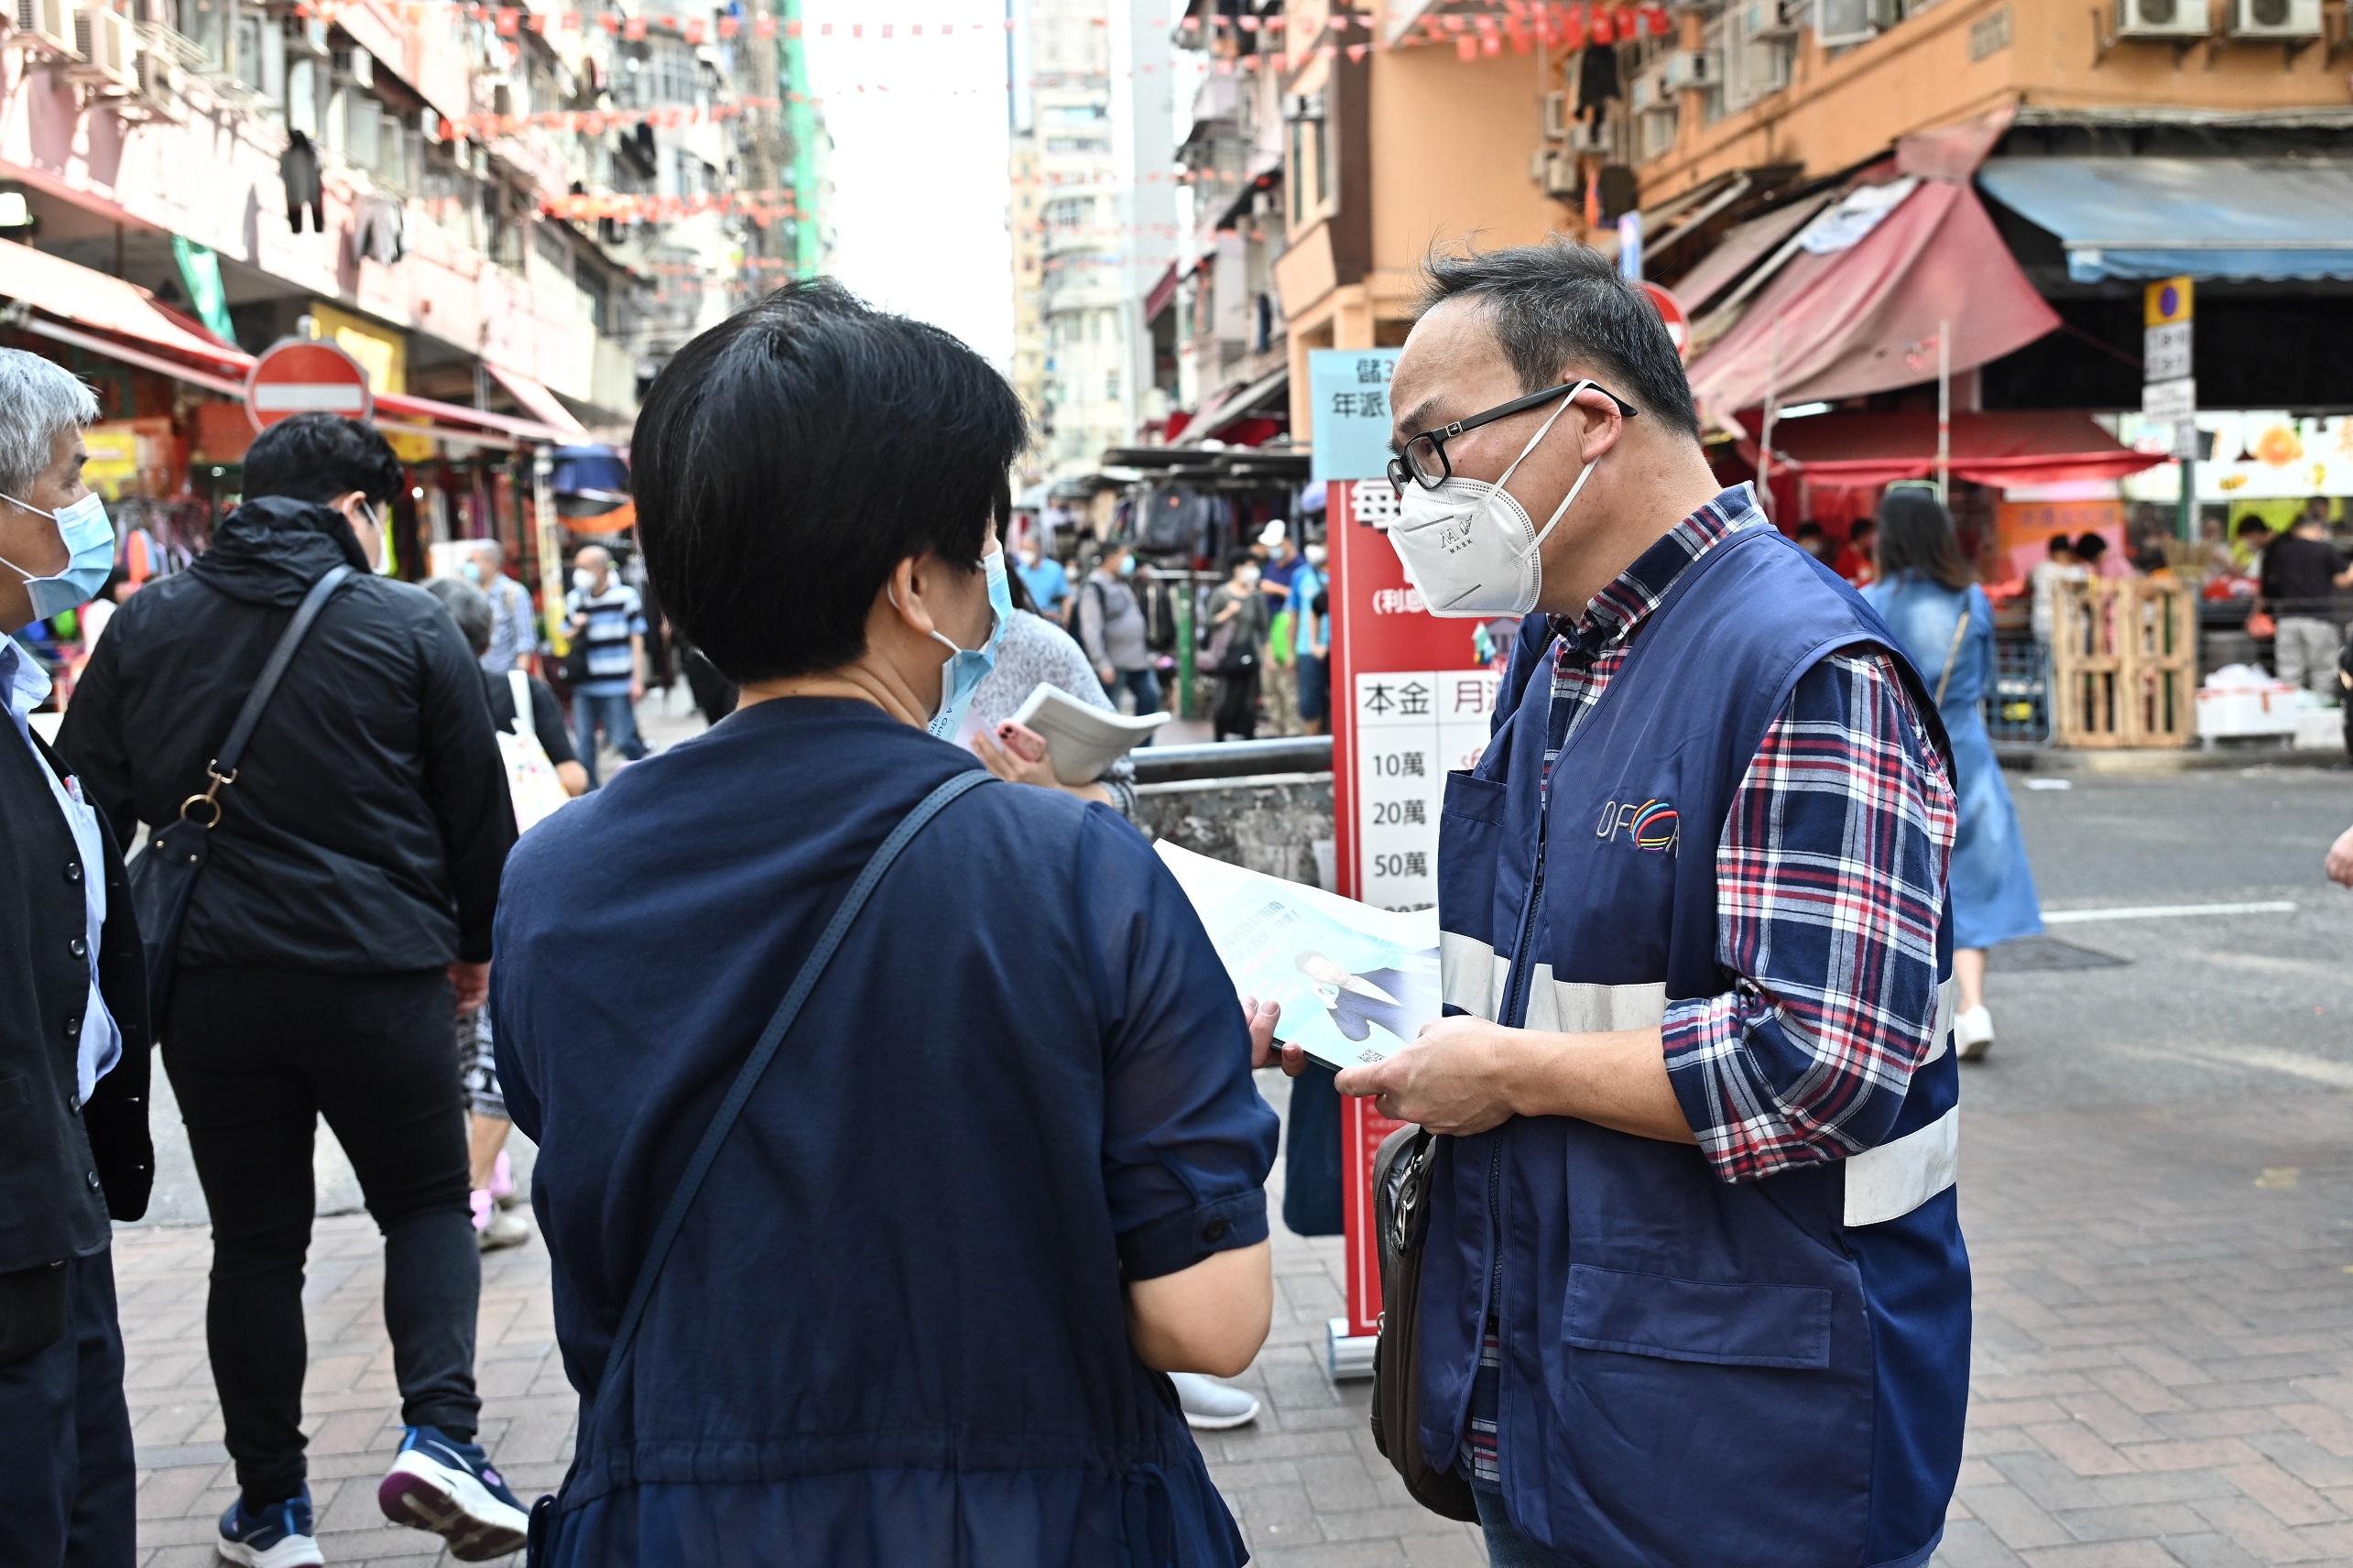 The Office of the Communications Authority (OFCA) conducted market surveillance this afternoon (April 11) in Sham Shui Po District to ensure effective implementation and enhance public awareness of the Real-name Registration Programme for Subscriber Identification Module Cards. Photo shows OFCA’s staff delivering pamphlets to citizens.